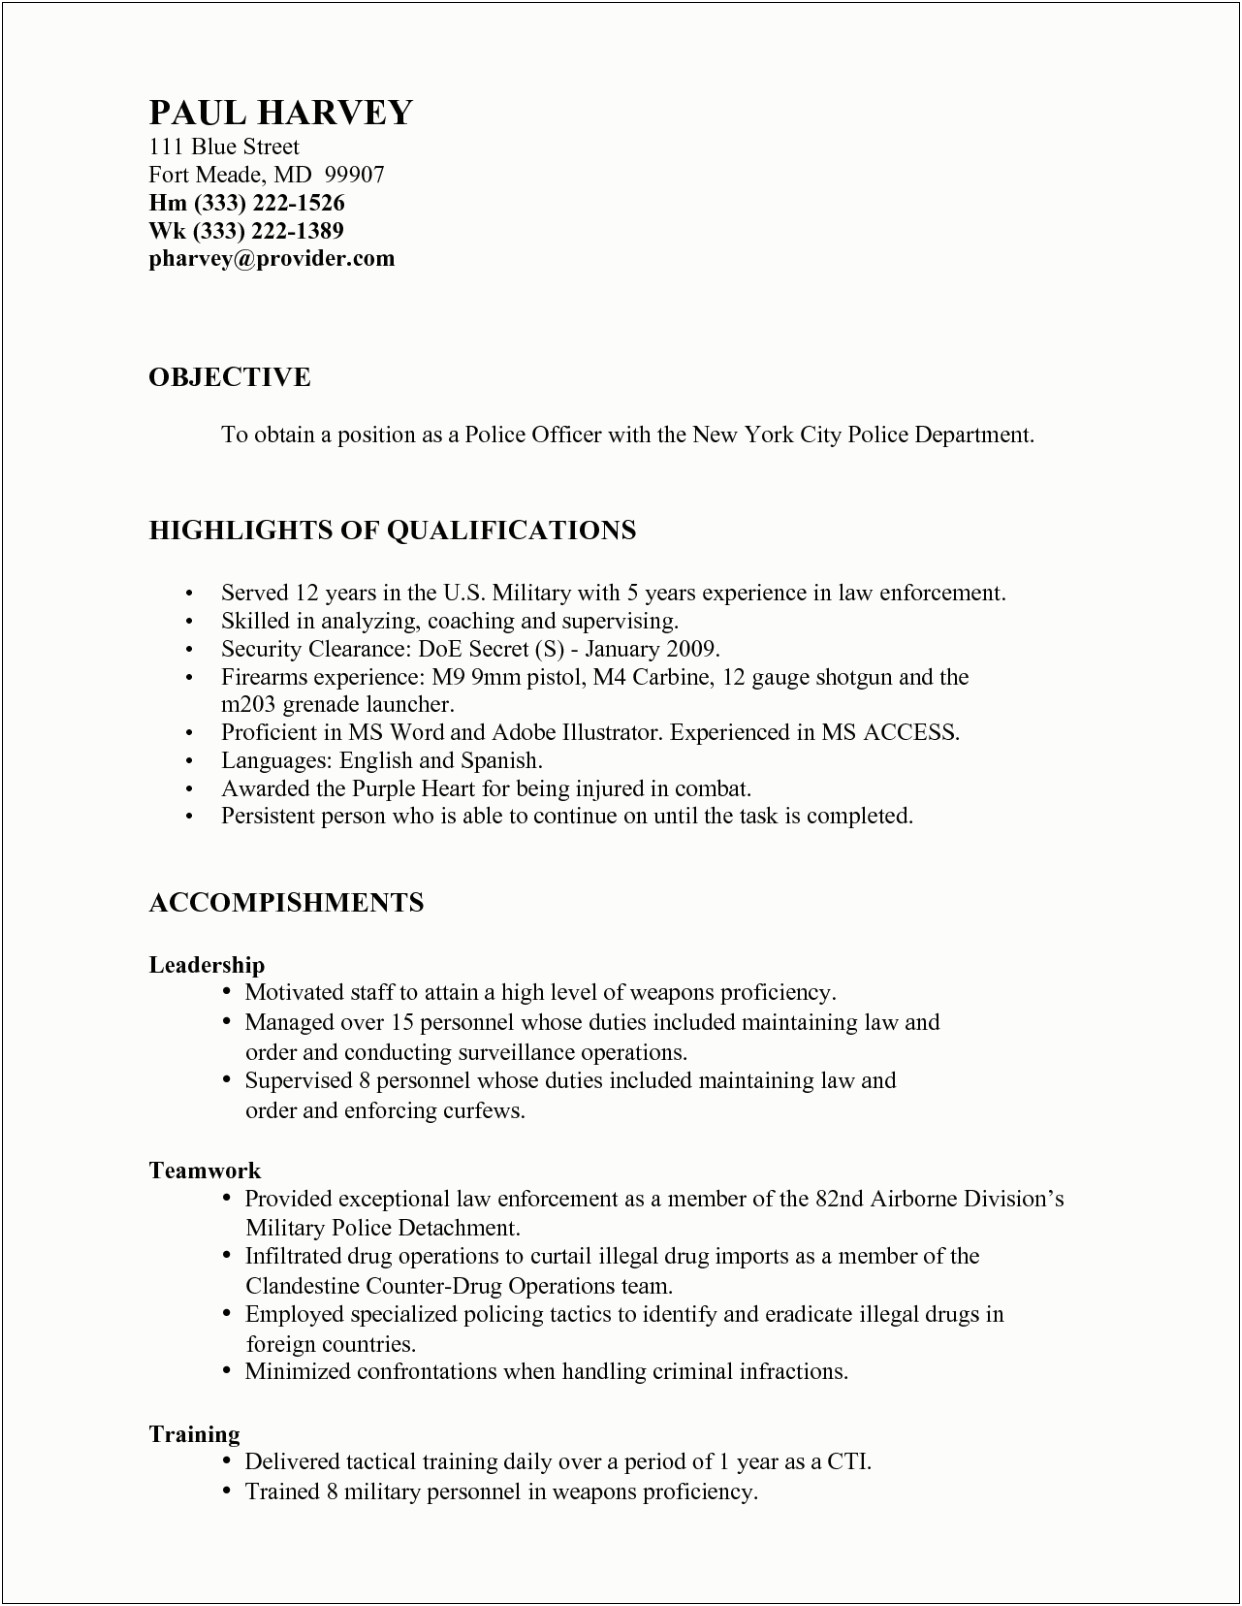 Resume Objective For Entry Level Police Officer